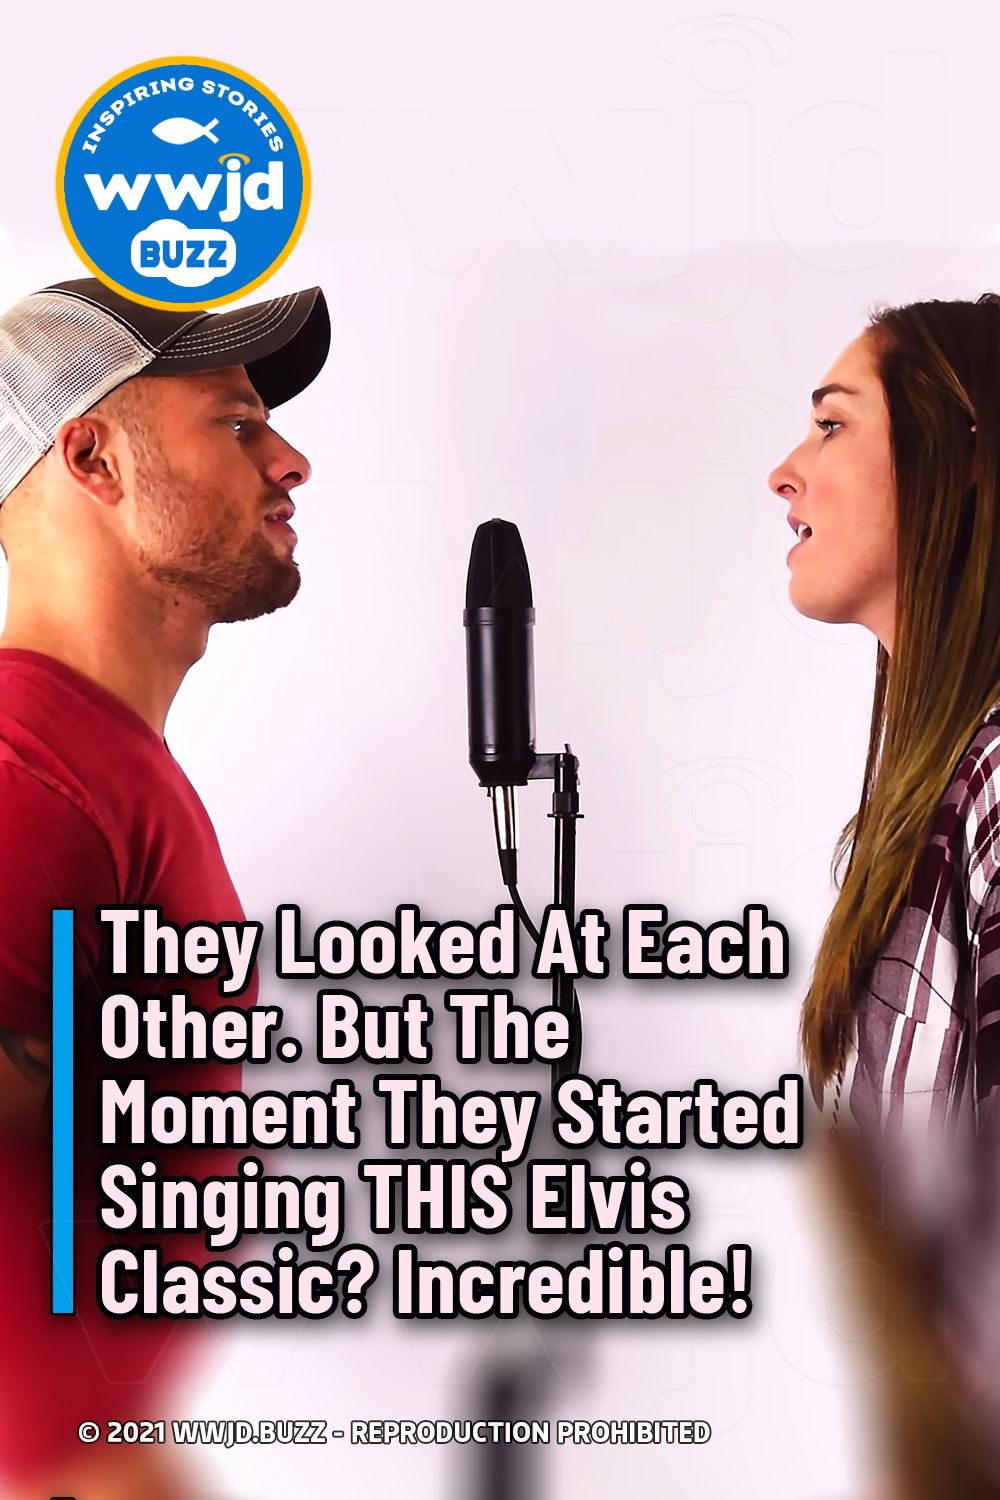 They Looked At Each Other. But The Moment They Started Singing THIS Elvis Classic? Incredible!